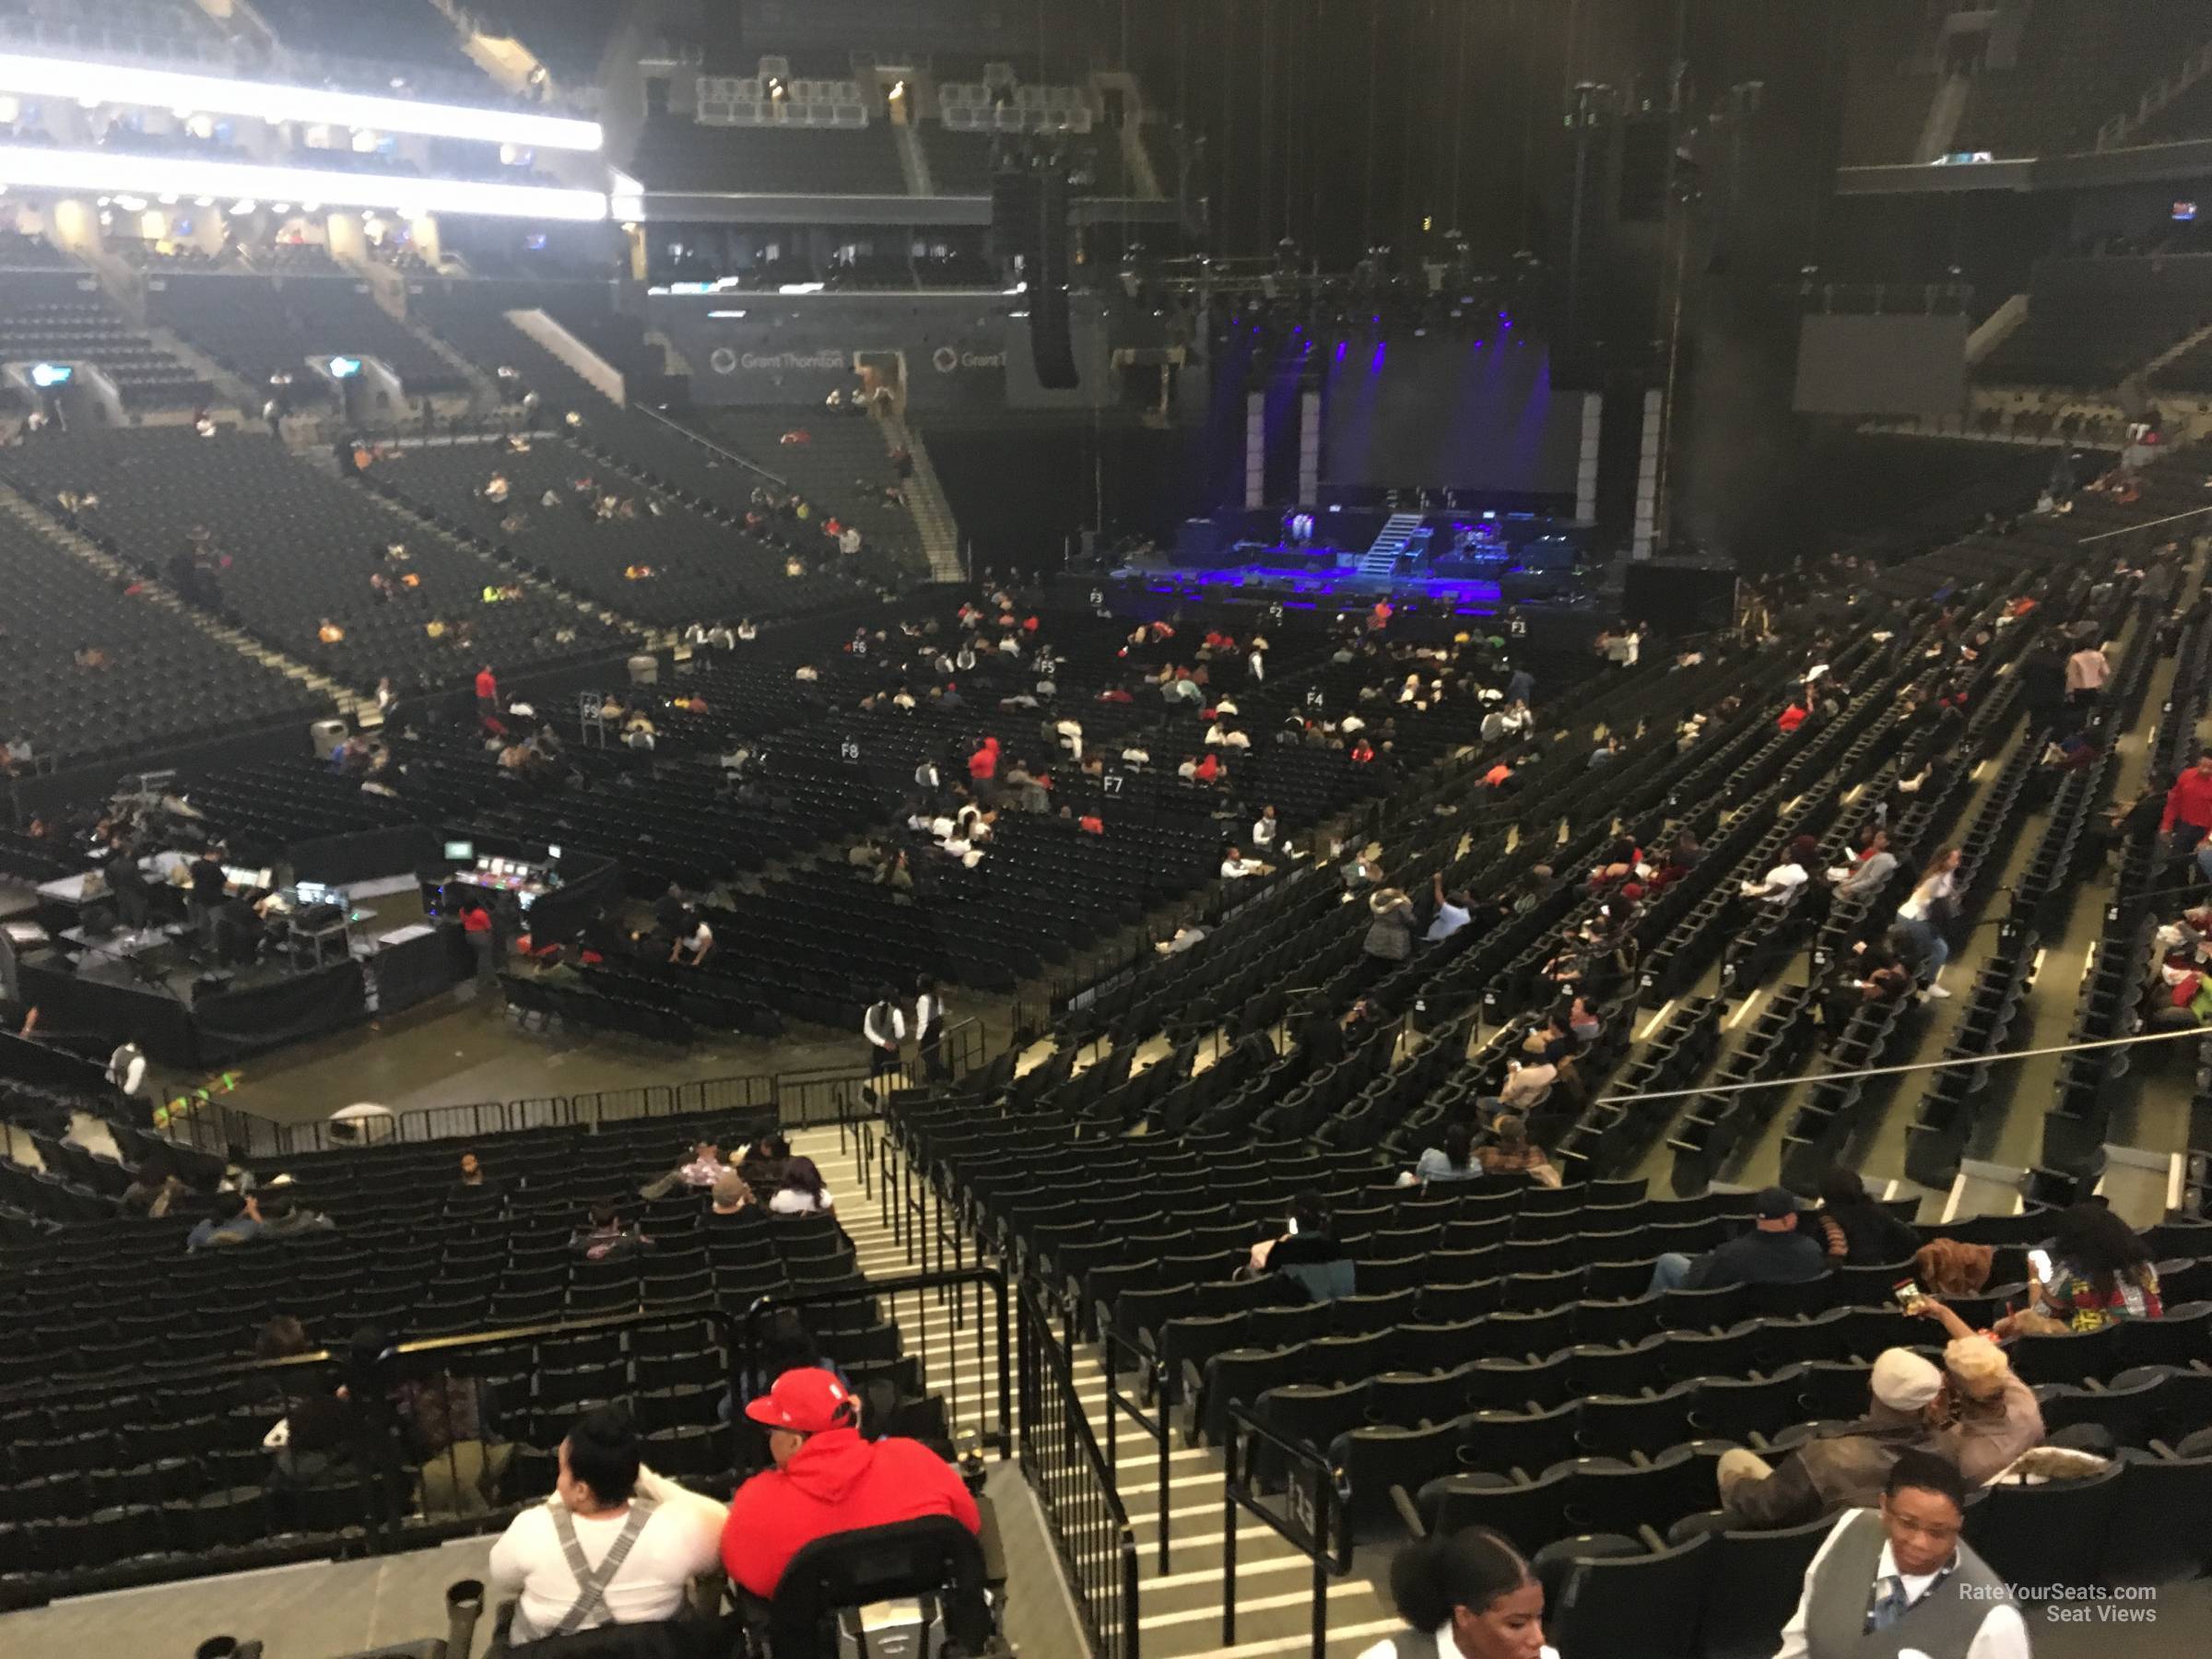 Barclays Center Section 112 Concert Seating - RateYourSeats.com